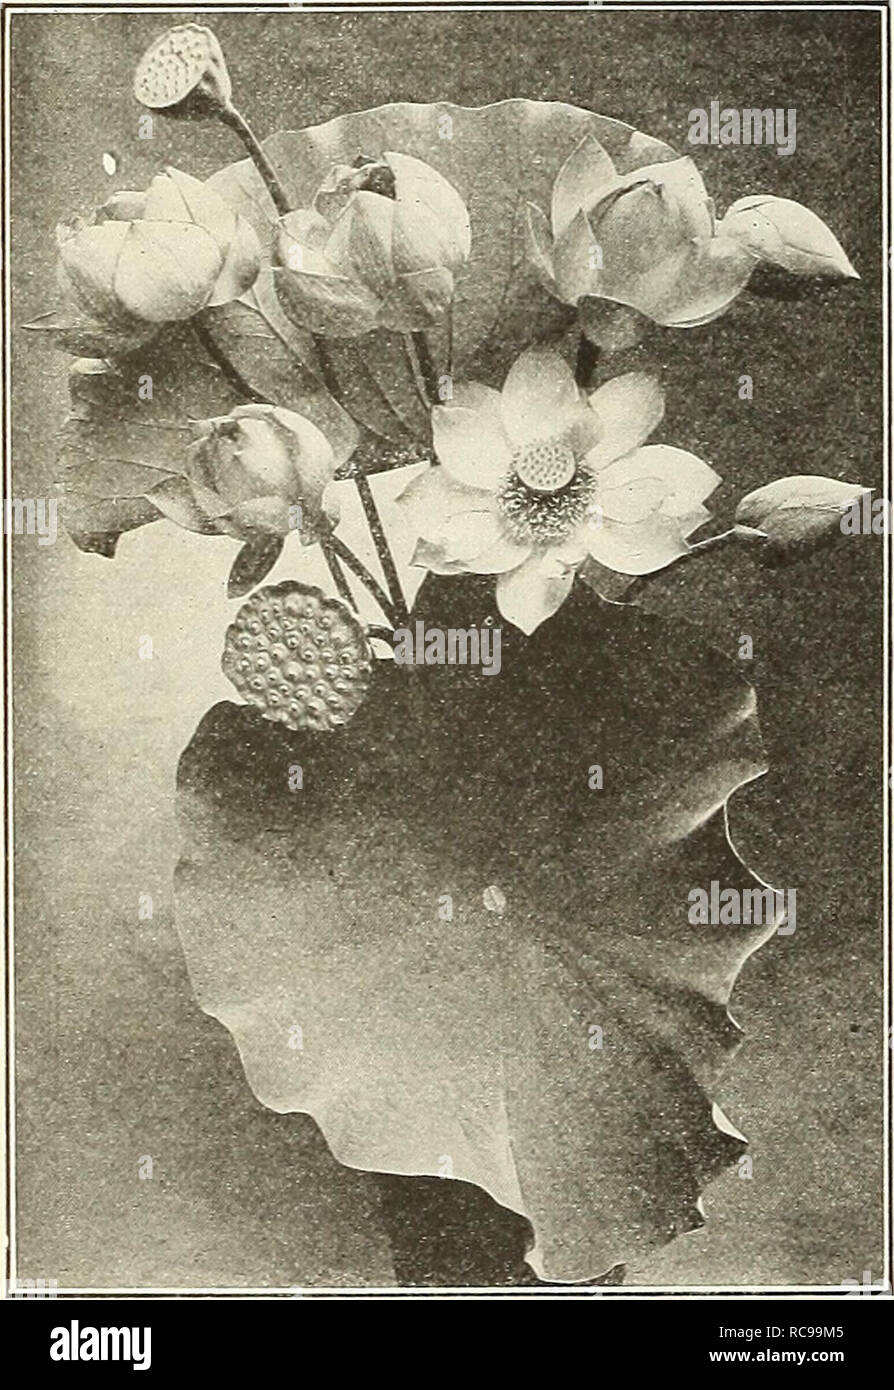 . Dreer's garden book 1923. Seeds Catalogs; Nursery stock Catalogs; Gardening Equipment and supplies Catalogs; Flowers Seeds Catalogs; Vegetables Seeds Catalogs; Fruit Seeds Catalogs. 208 /flEBRyA-BREEH^ ^^fHt^HlLBmiPHRlk HARDY NYMPHAEAS OR WATER LILIES space; A select list of the most suitable varieties for all Hardy Water garden purposes. Ready April 15th Blue Water Lily. All varieties of that color will be found under Day Blooming Tender Nymphaeas. Alba Candidissima. A very vigorous and desirable variety, requiring ample flowers large, pure white, SI.50 each. Gladstoniana. Flowers pure daz Stock Photo